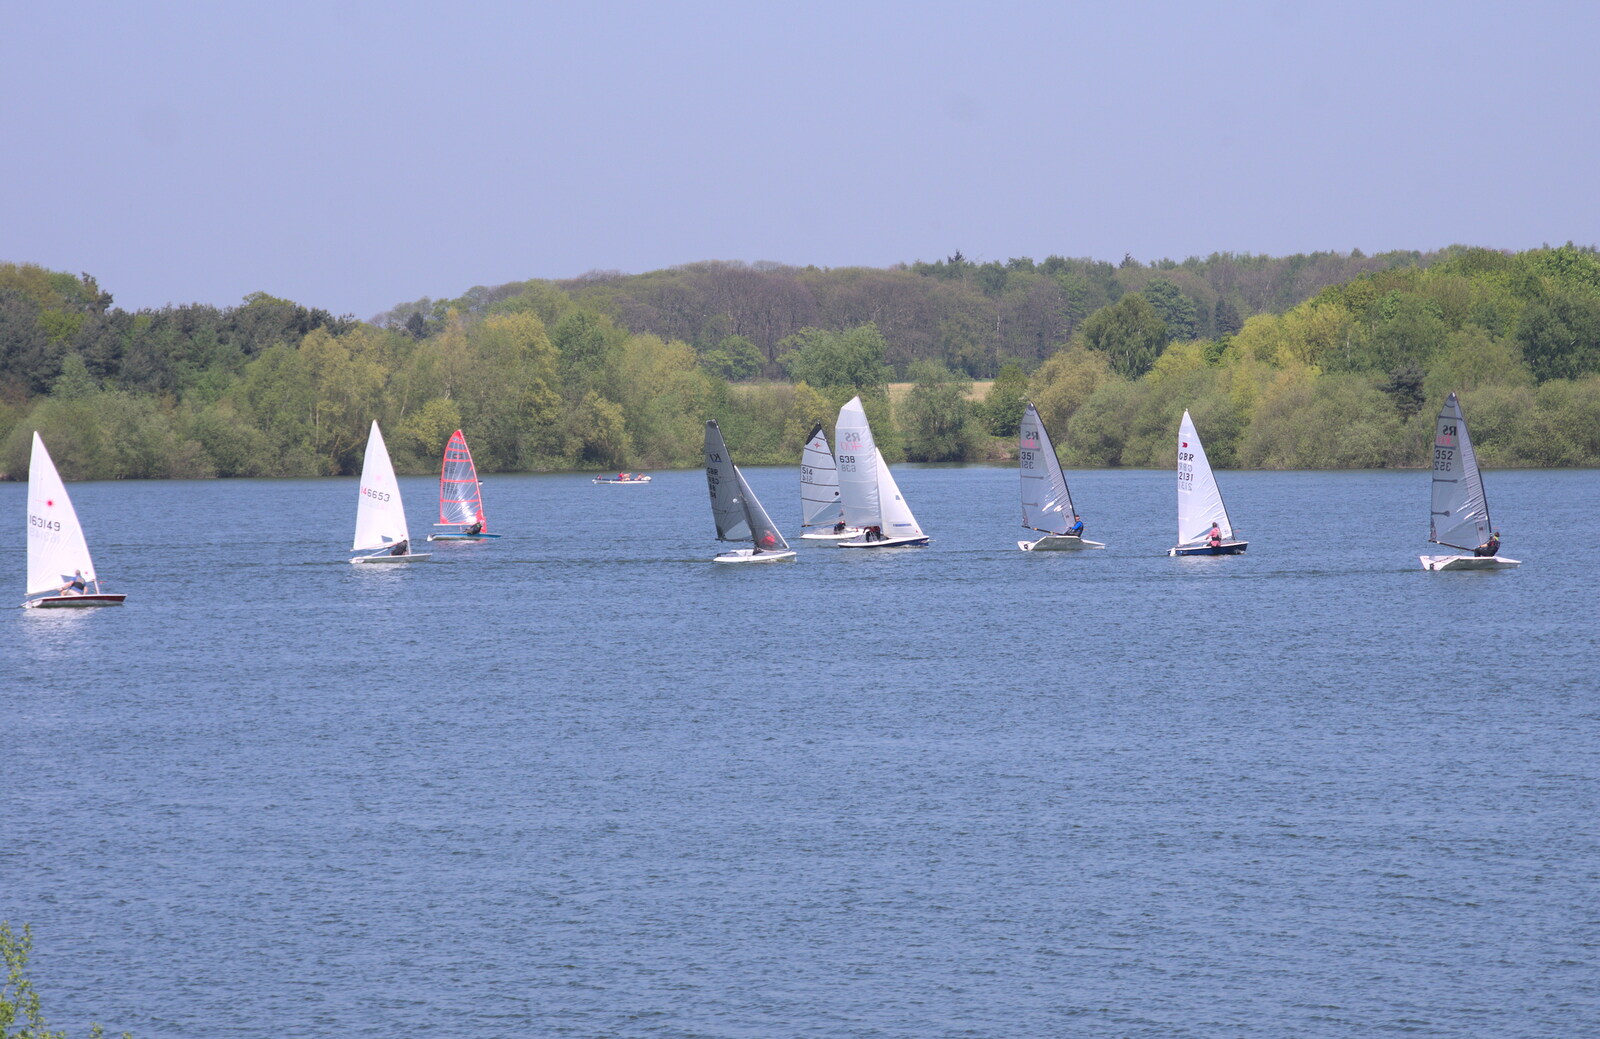 More sailing out on the water from Isobel's 10km Run, Alton Water, Stutton, Suffolk - 6th May 2018